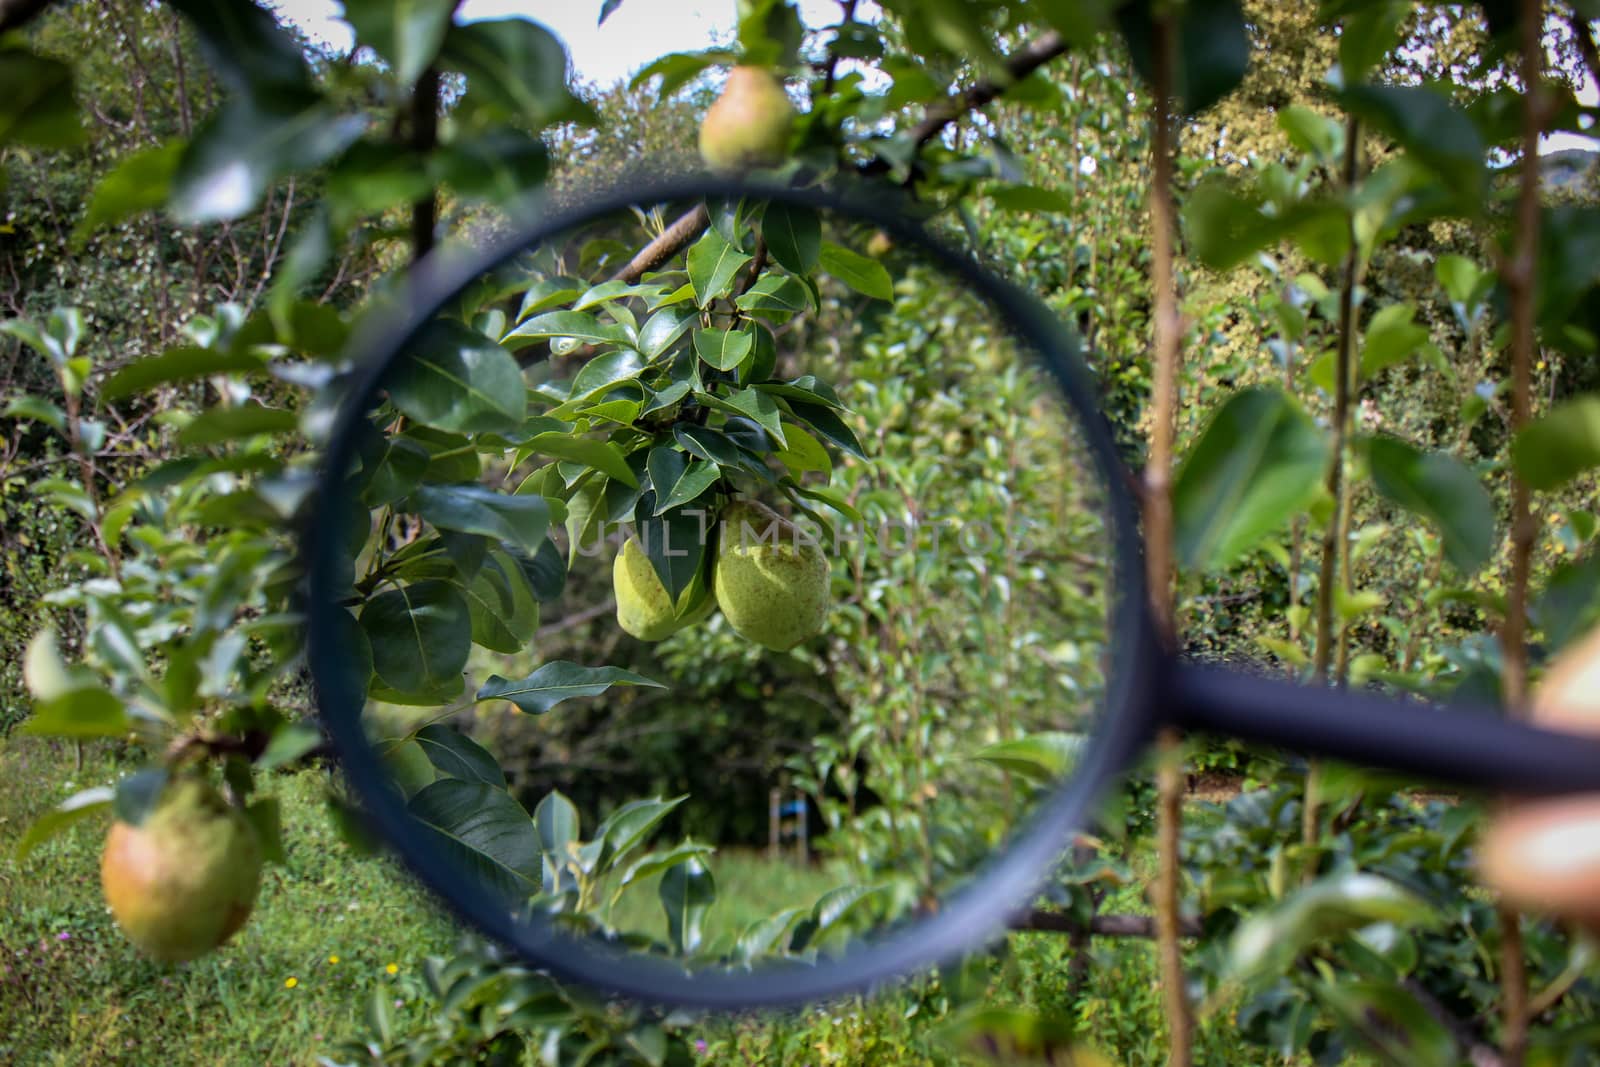 Two green pears magnified with a magnifying glass on a branch. Research on pears. Zavidovici, Bosnia and Herzegovina.